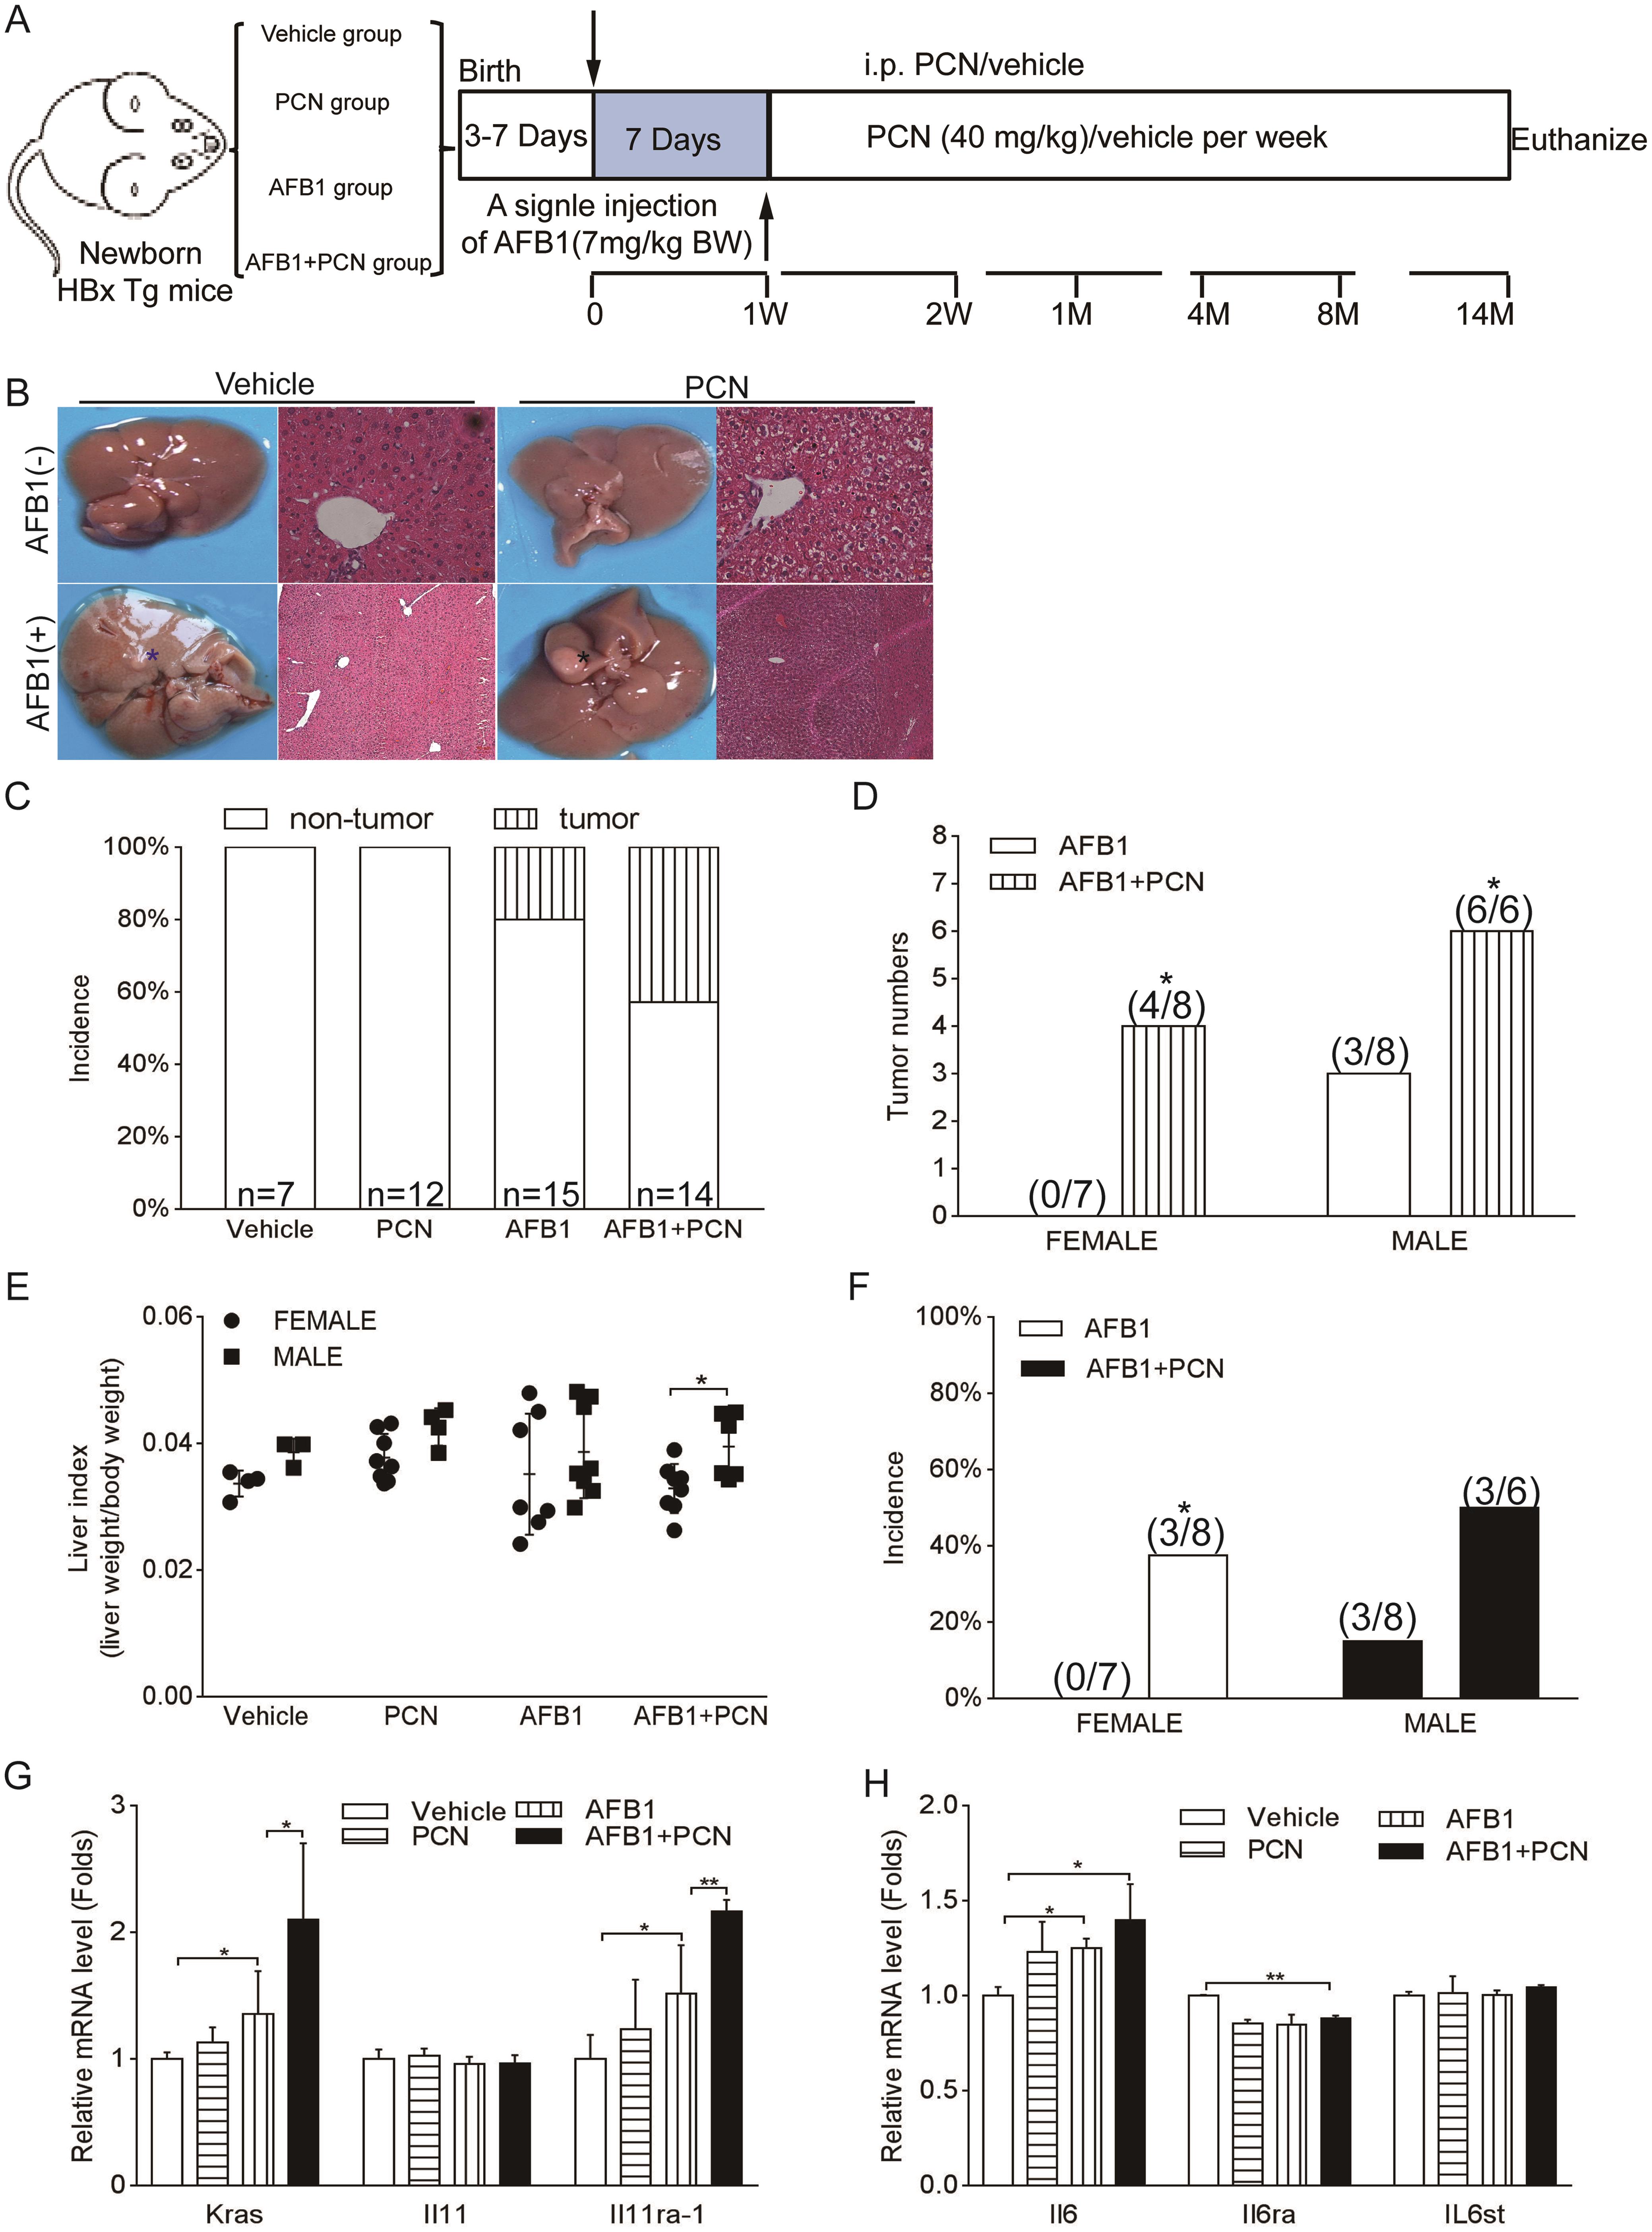 Molecular mechanism of tumorigenesis due to HBx and AFB1 co-exposure in mice.